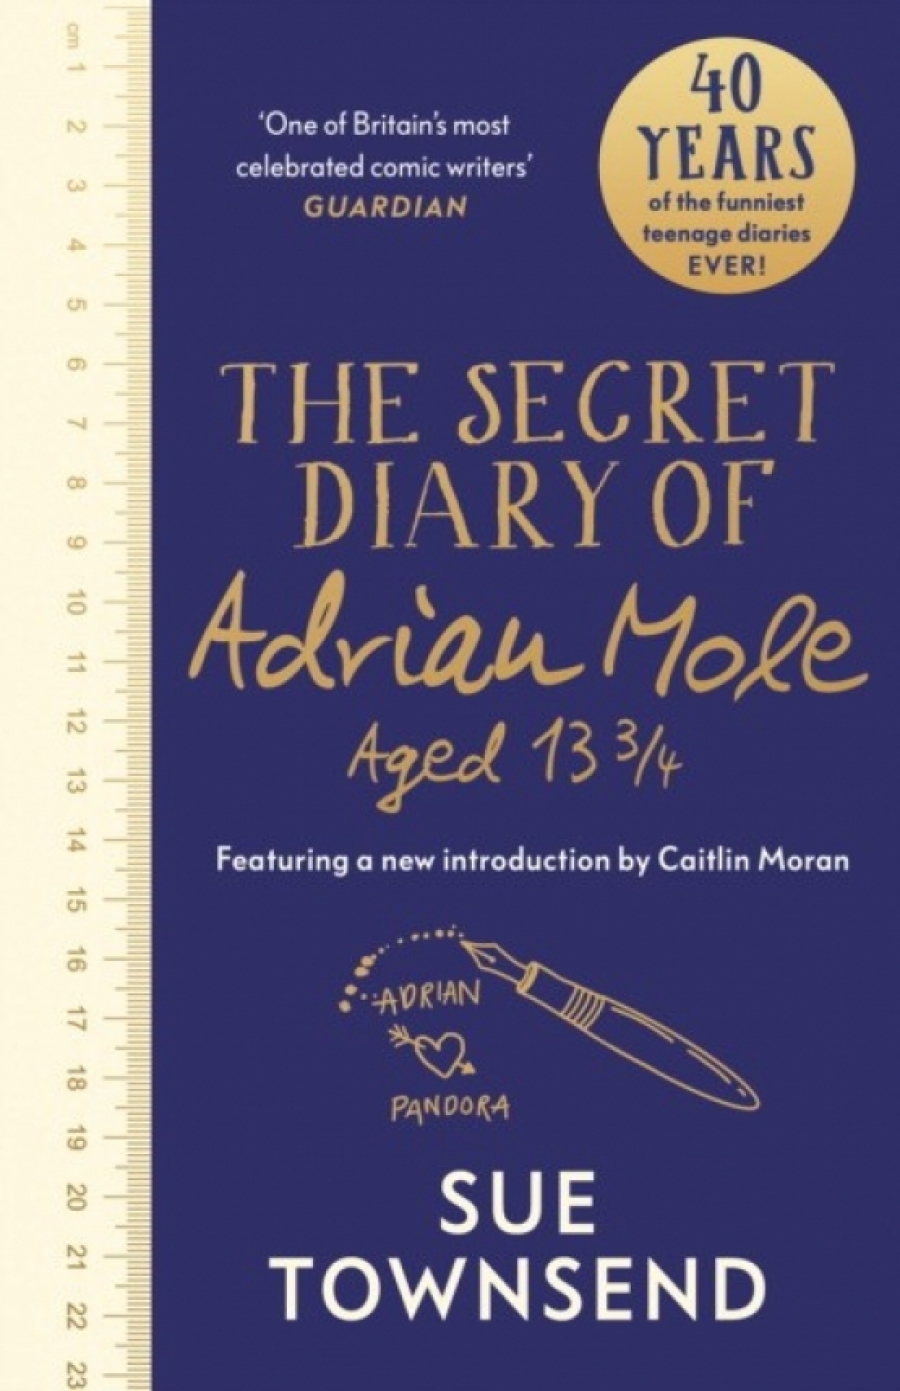 Townsend Sue The Secret Diary of Adrian Mole Aged 13 3/4 